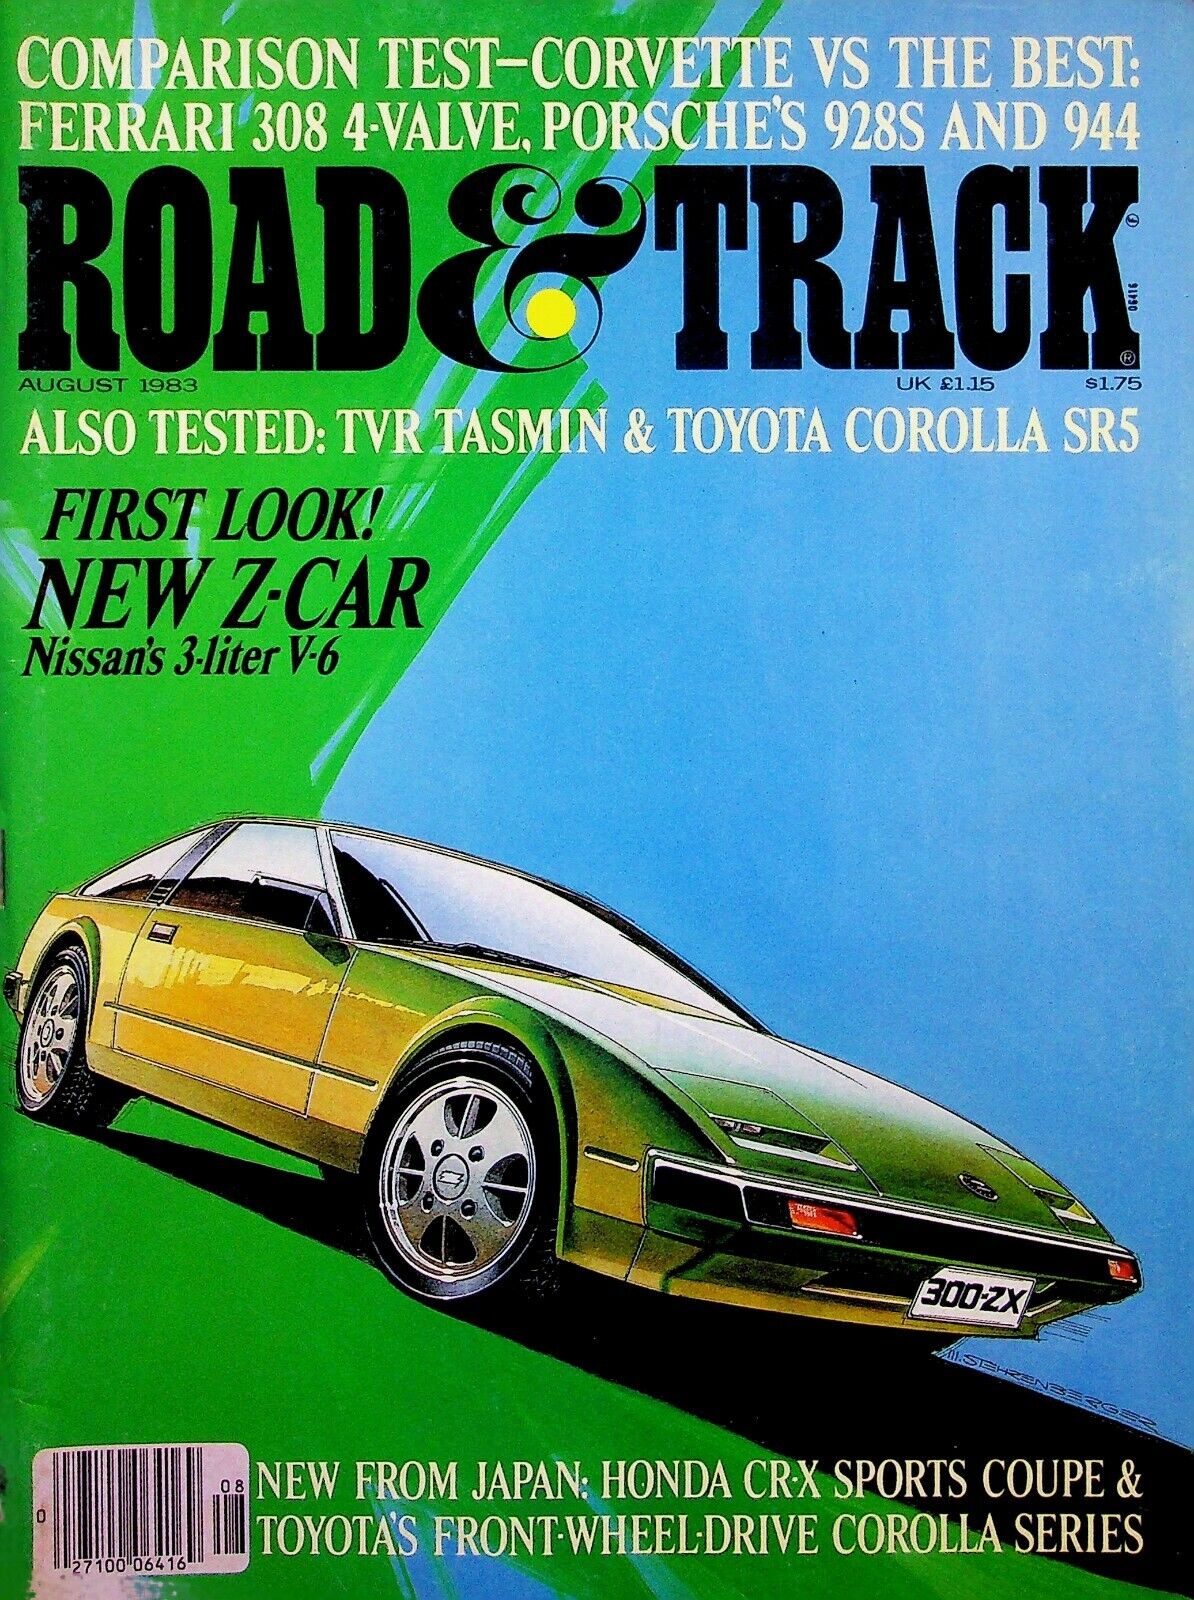 FIRST LOOK NEW Z-CAR NISSAN'S 3-LITER V-6 - ROAD & TRACK MAGAZINE,  AUGUST 1983